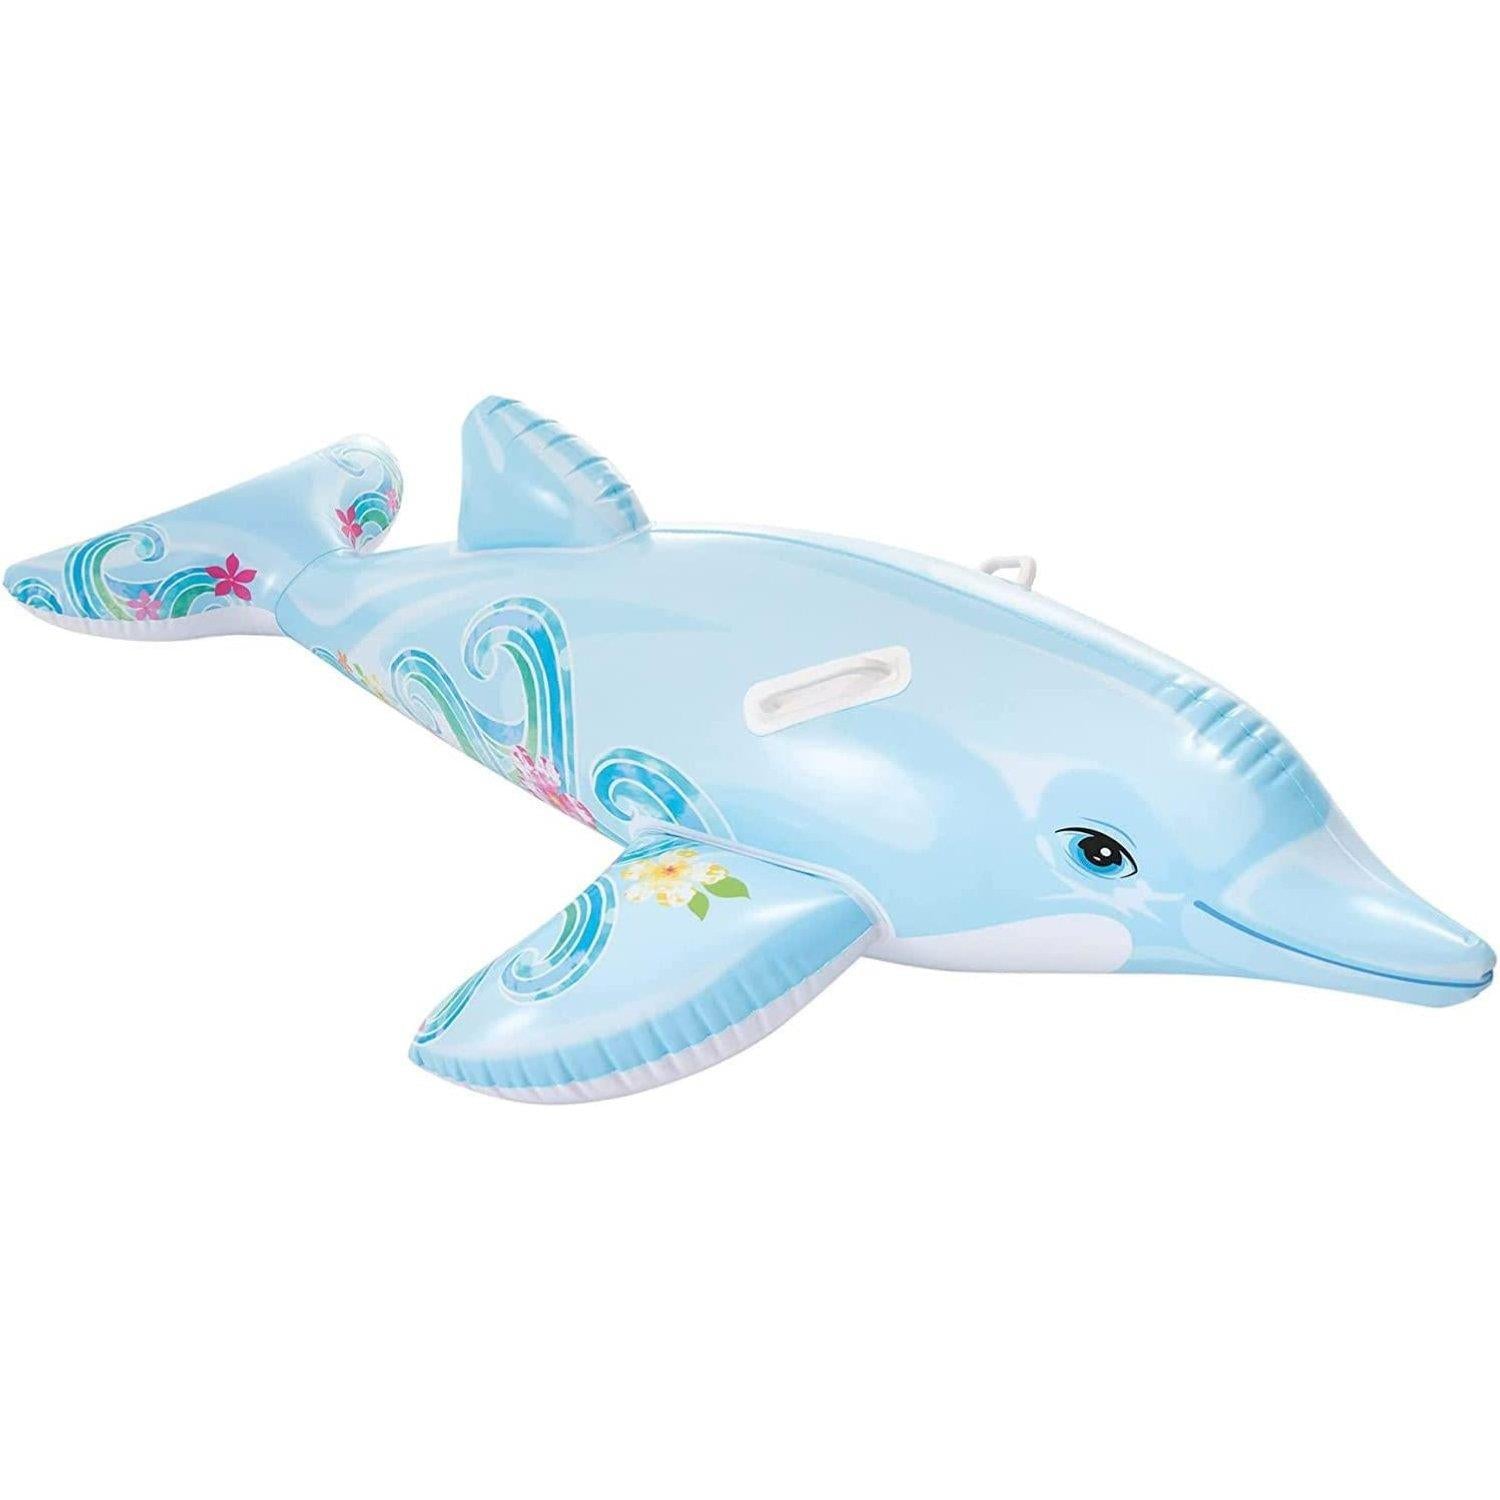 Intex Inflatable Toys Dolphin Ride On Swimming Pool Float